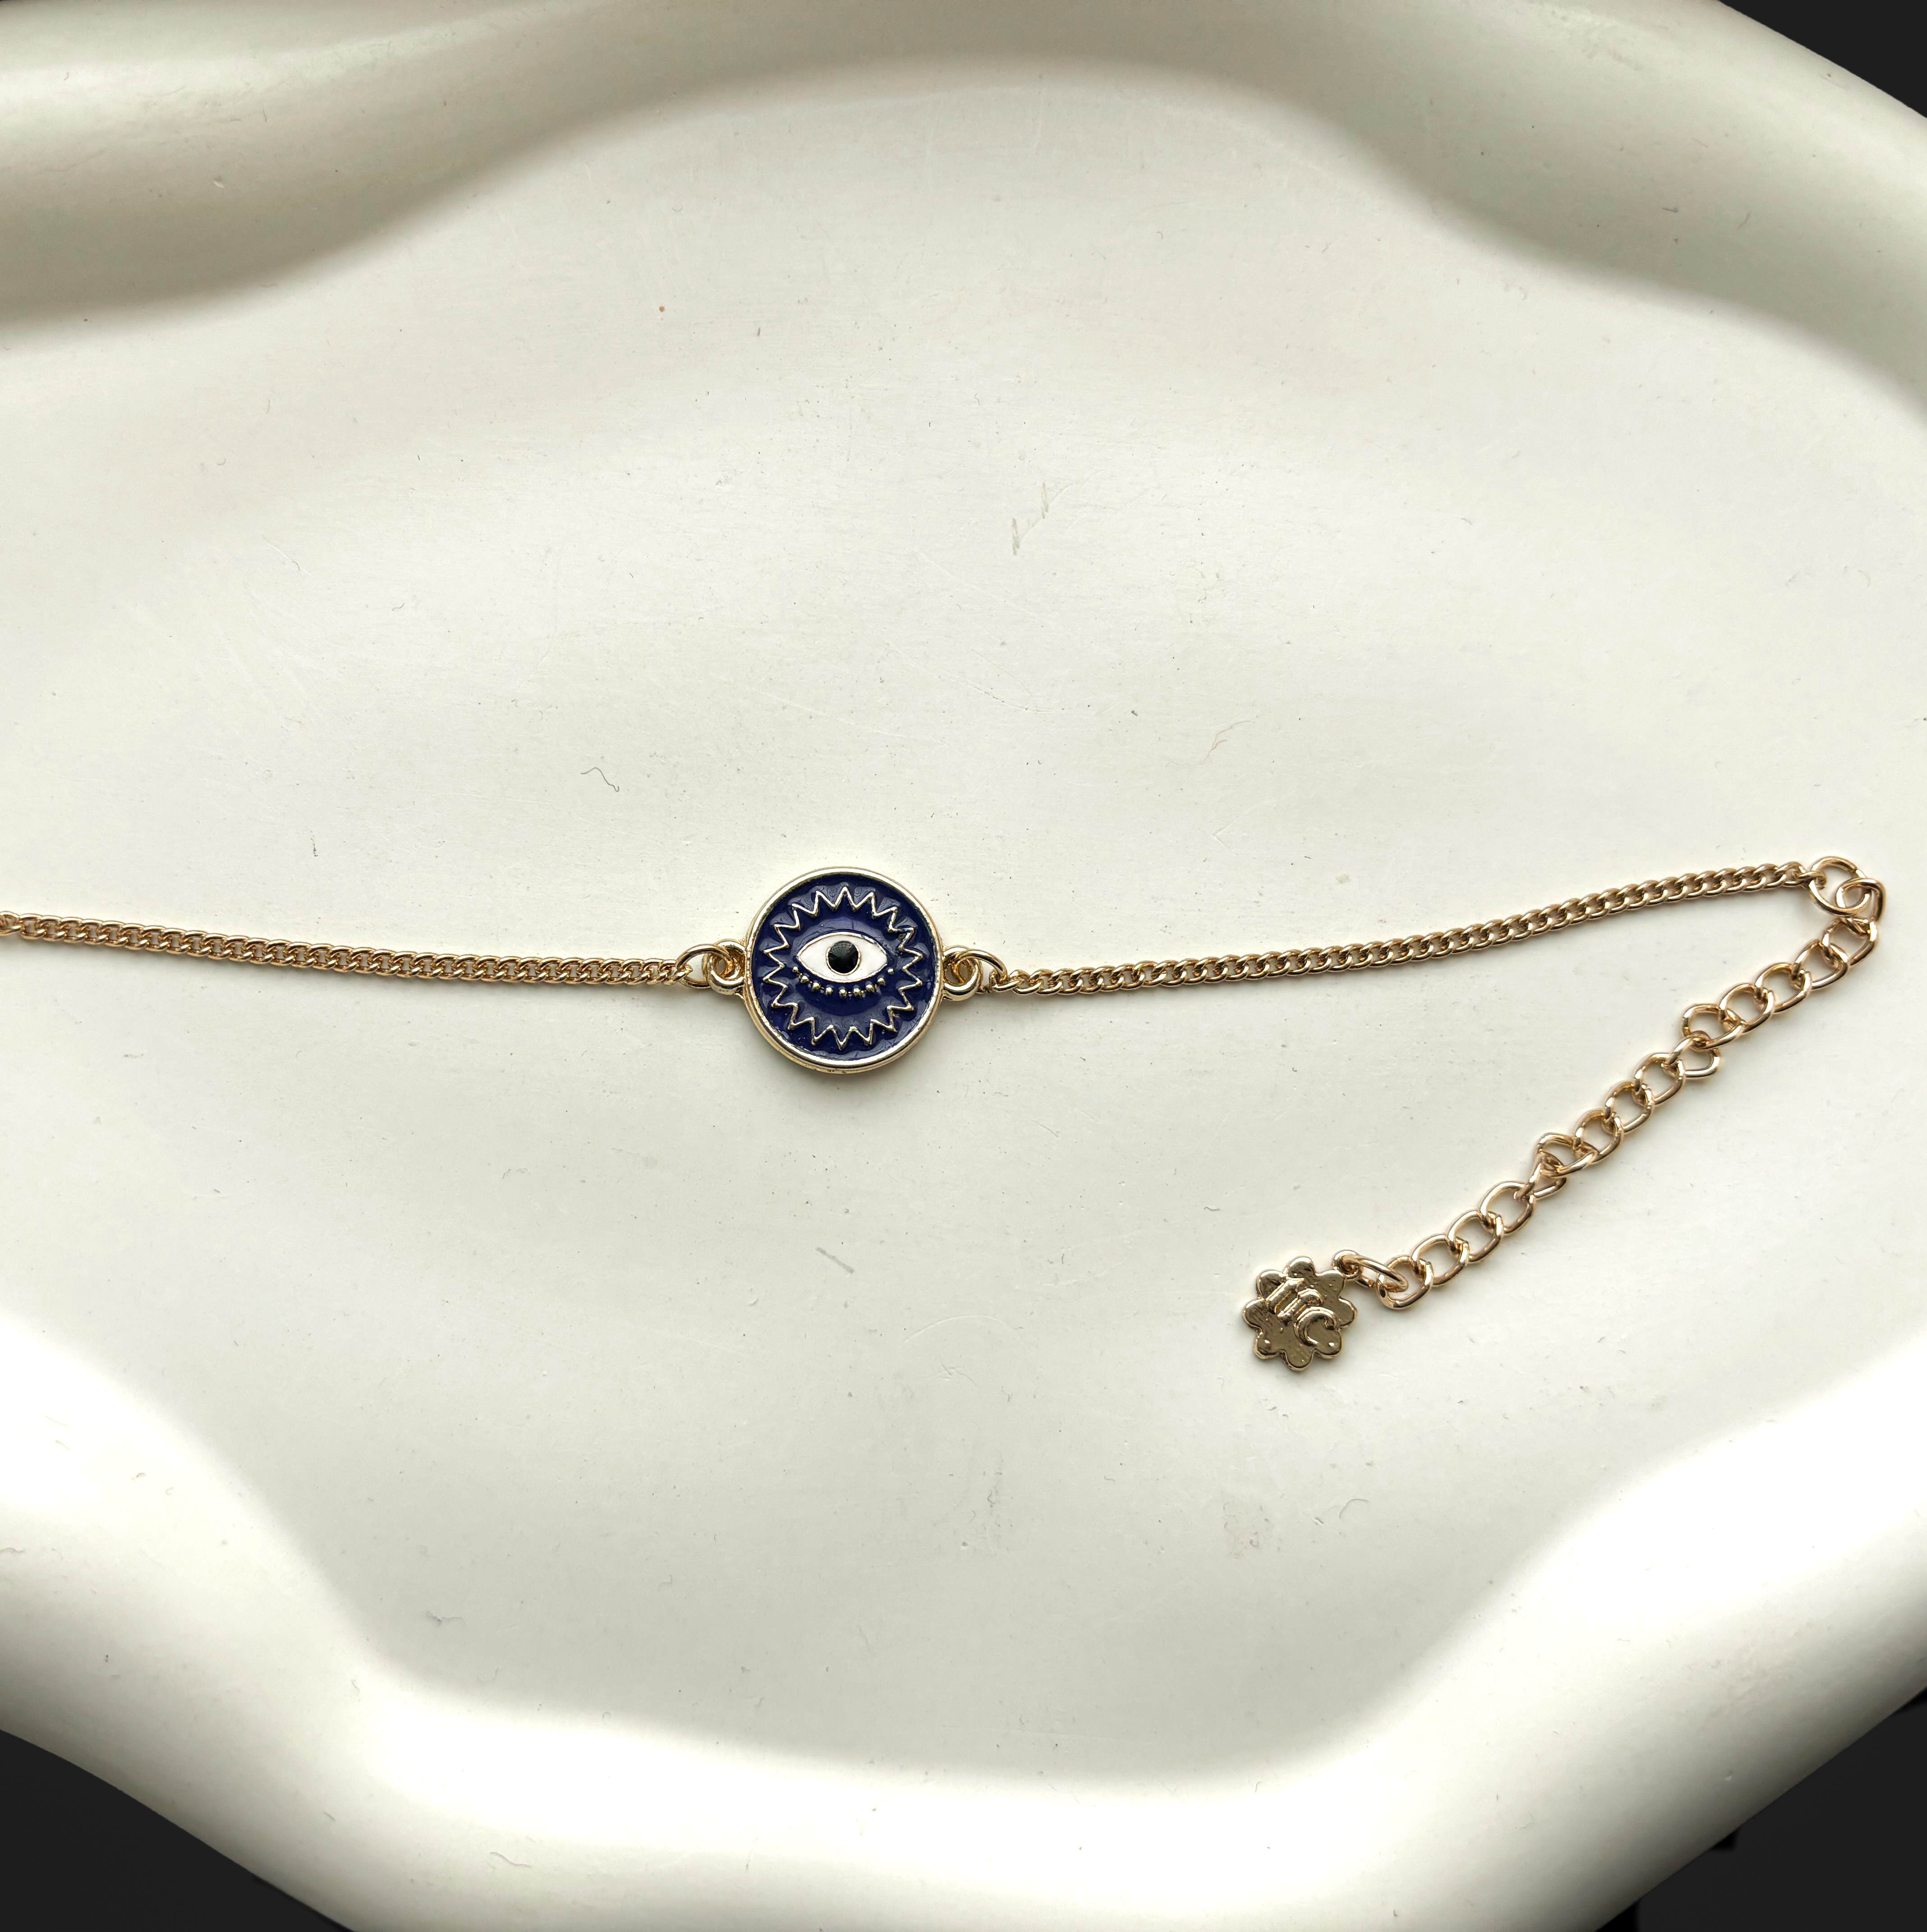 TFC Circle Evil Eye Gold Plated Bracelet-Discover our stunning collection of stylish bracelets for women, featuring exquisite pearl bracelets, handcrafted beaded bracelets, and elegant gold-plated designs. Enjoy cheapest anti-tarnish fashion jewellery and long-lasting brilliance only at The Fun Company.